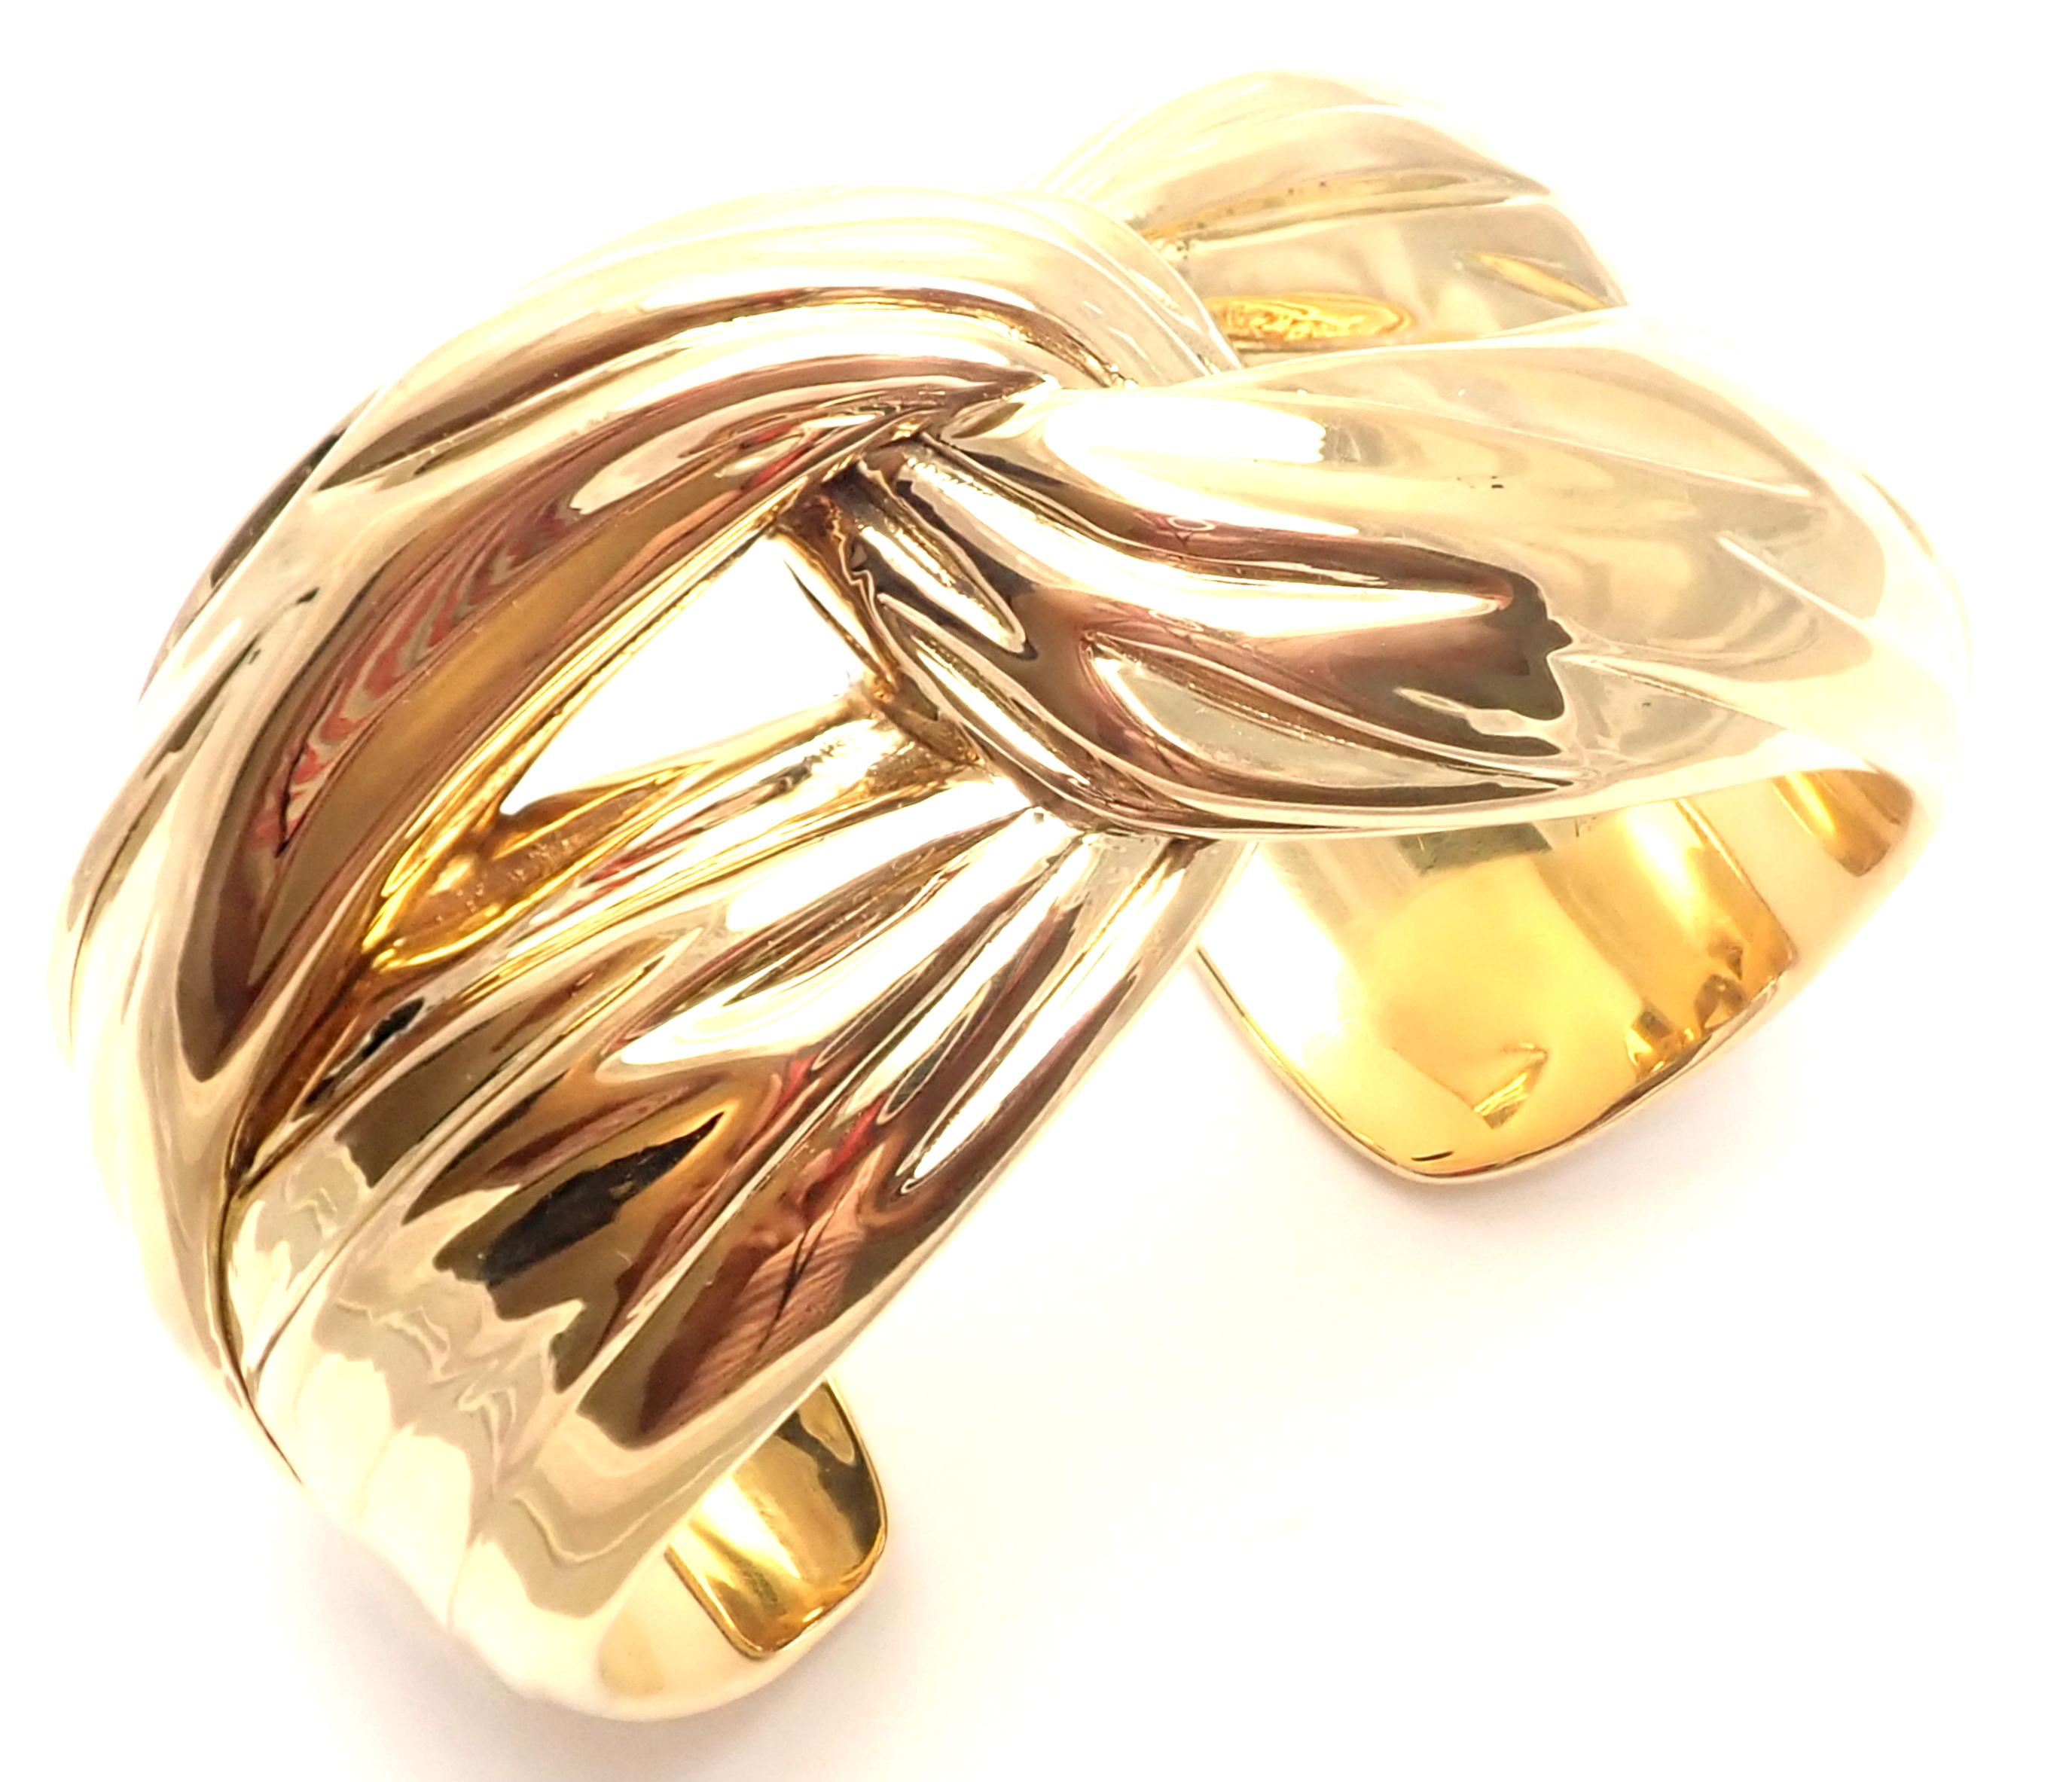 18k Solid Yellow Gold Cuff Bangle Bracelet by Yves Saint Laurent YSL Paris. 
Details: 
Length: 7.5 inches
Width: 1